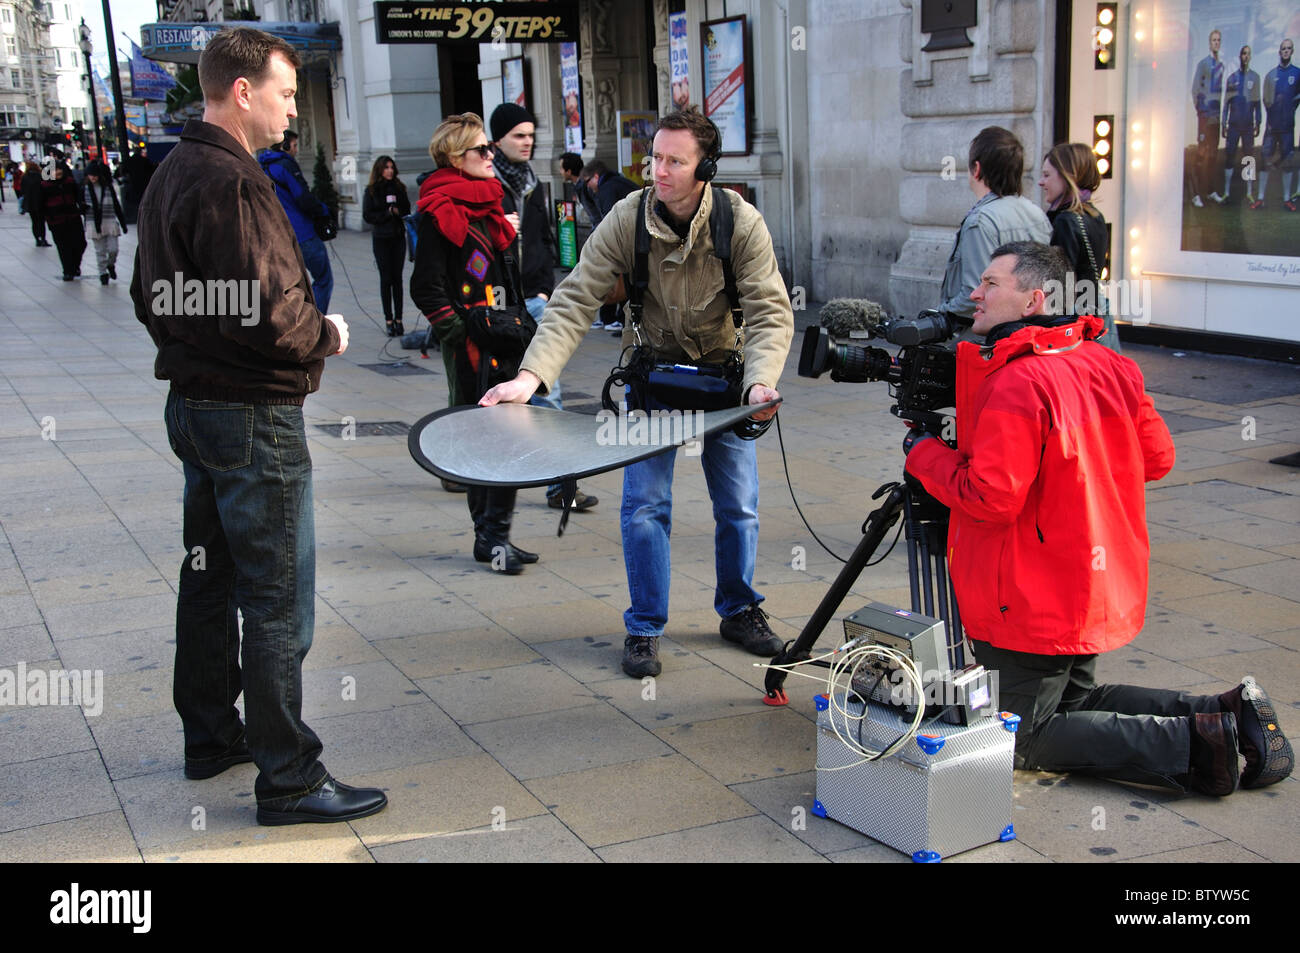 Film-Crew mit Moderatorin, Piccadilly Circus, Piccadilly, West End, City of Westminster, London, England, Vereinigtes Königreich Stockfoto